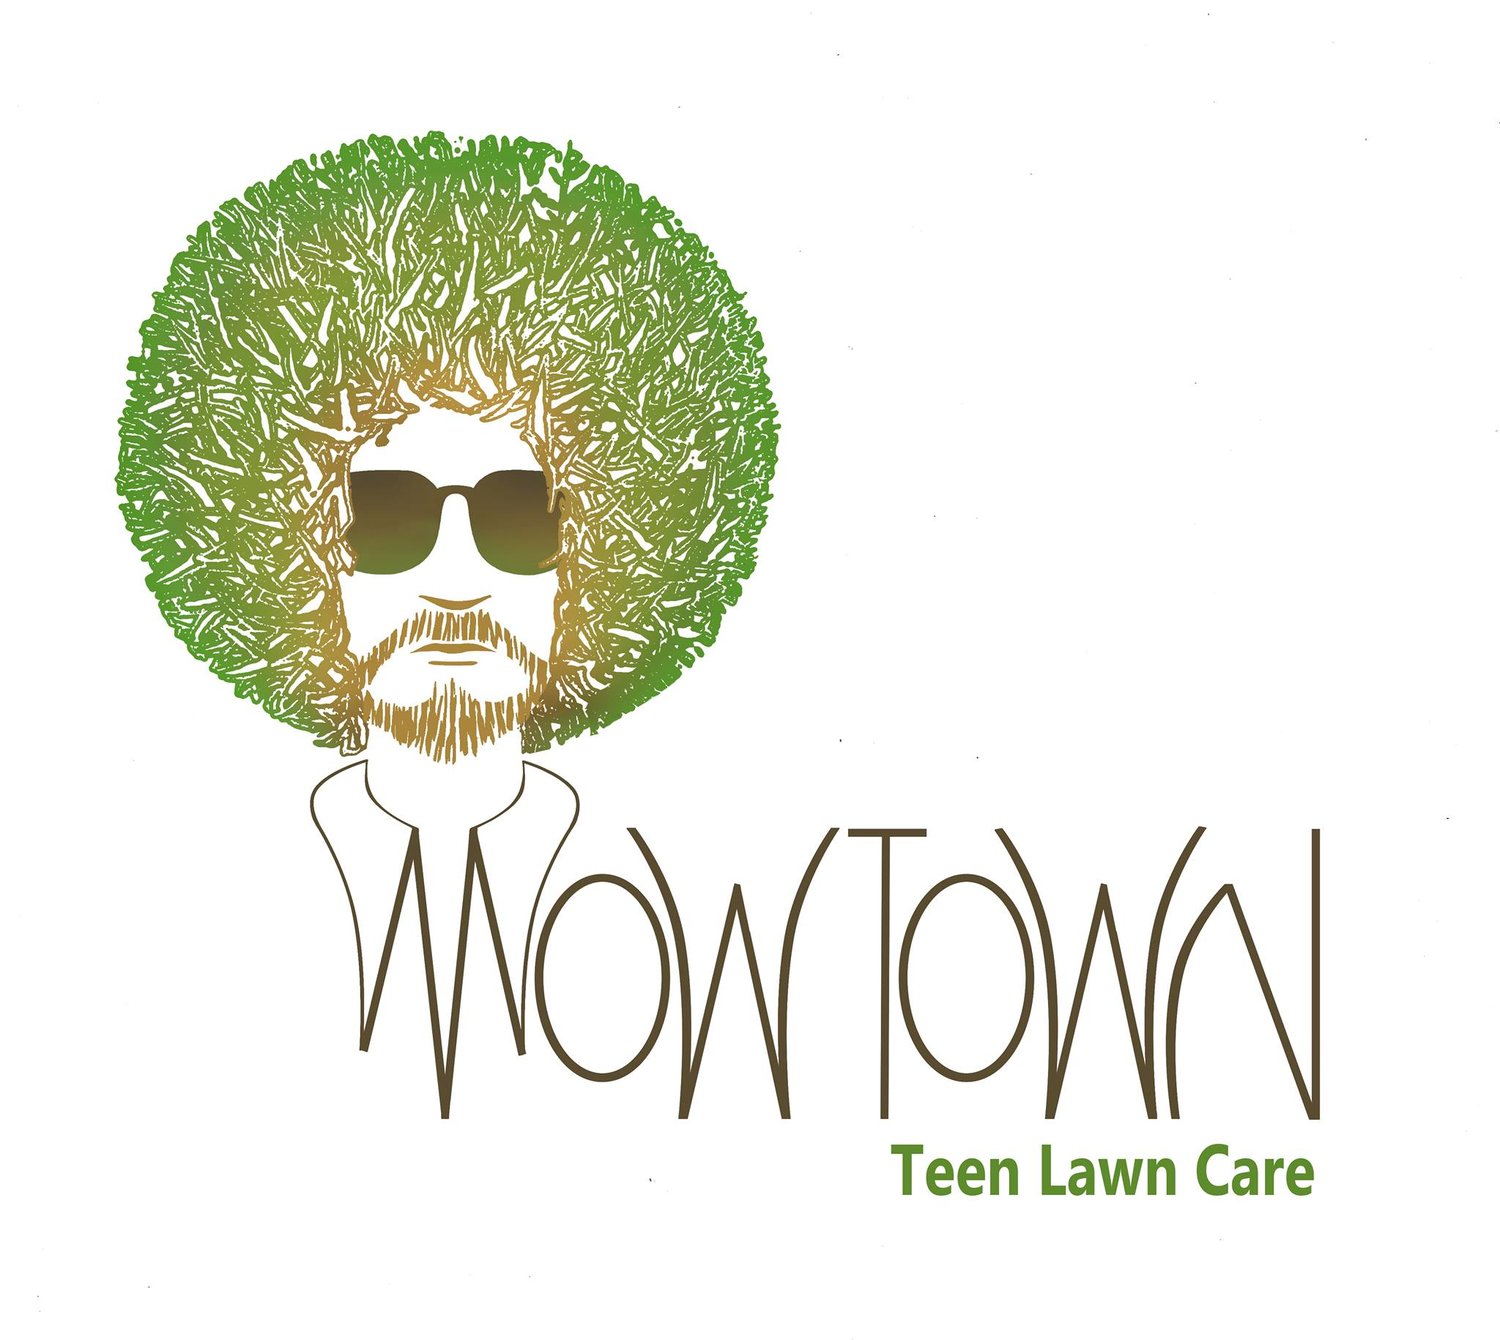 Mowtown Teen Lawn Care